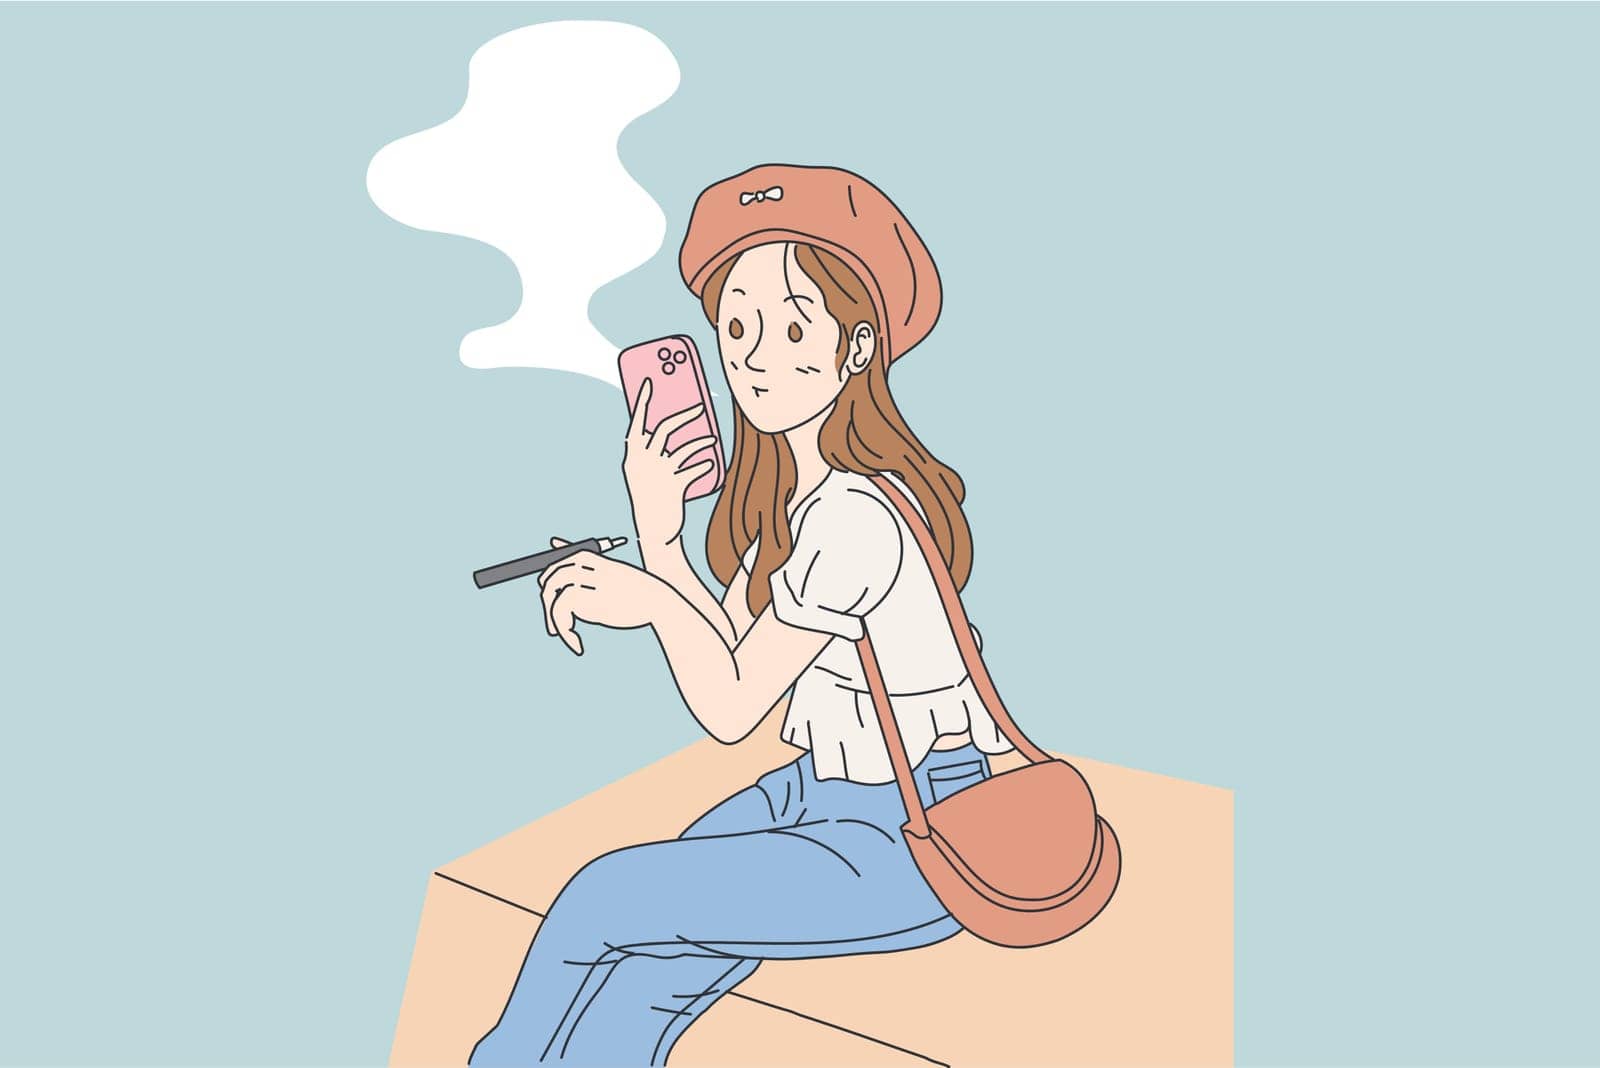 Vape girl cartoon style holding vapor electric  cigarette with activities flat vector illustration by Boingzstudio